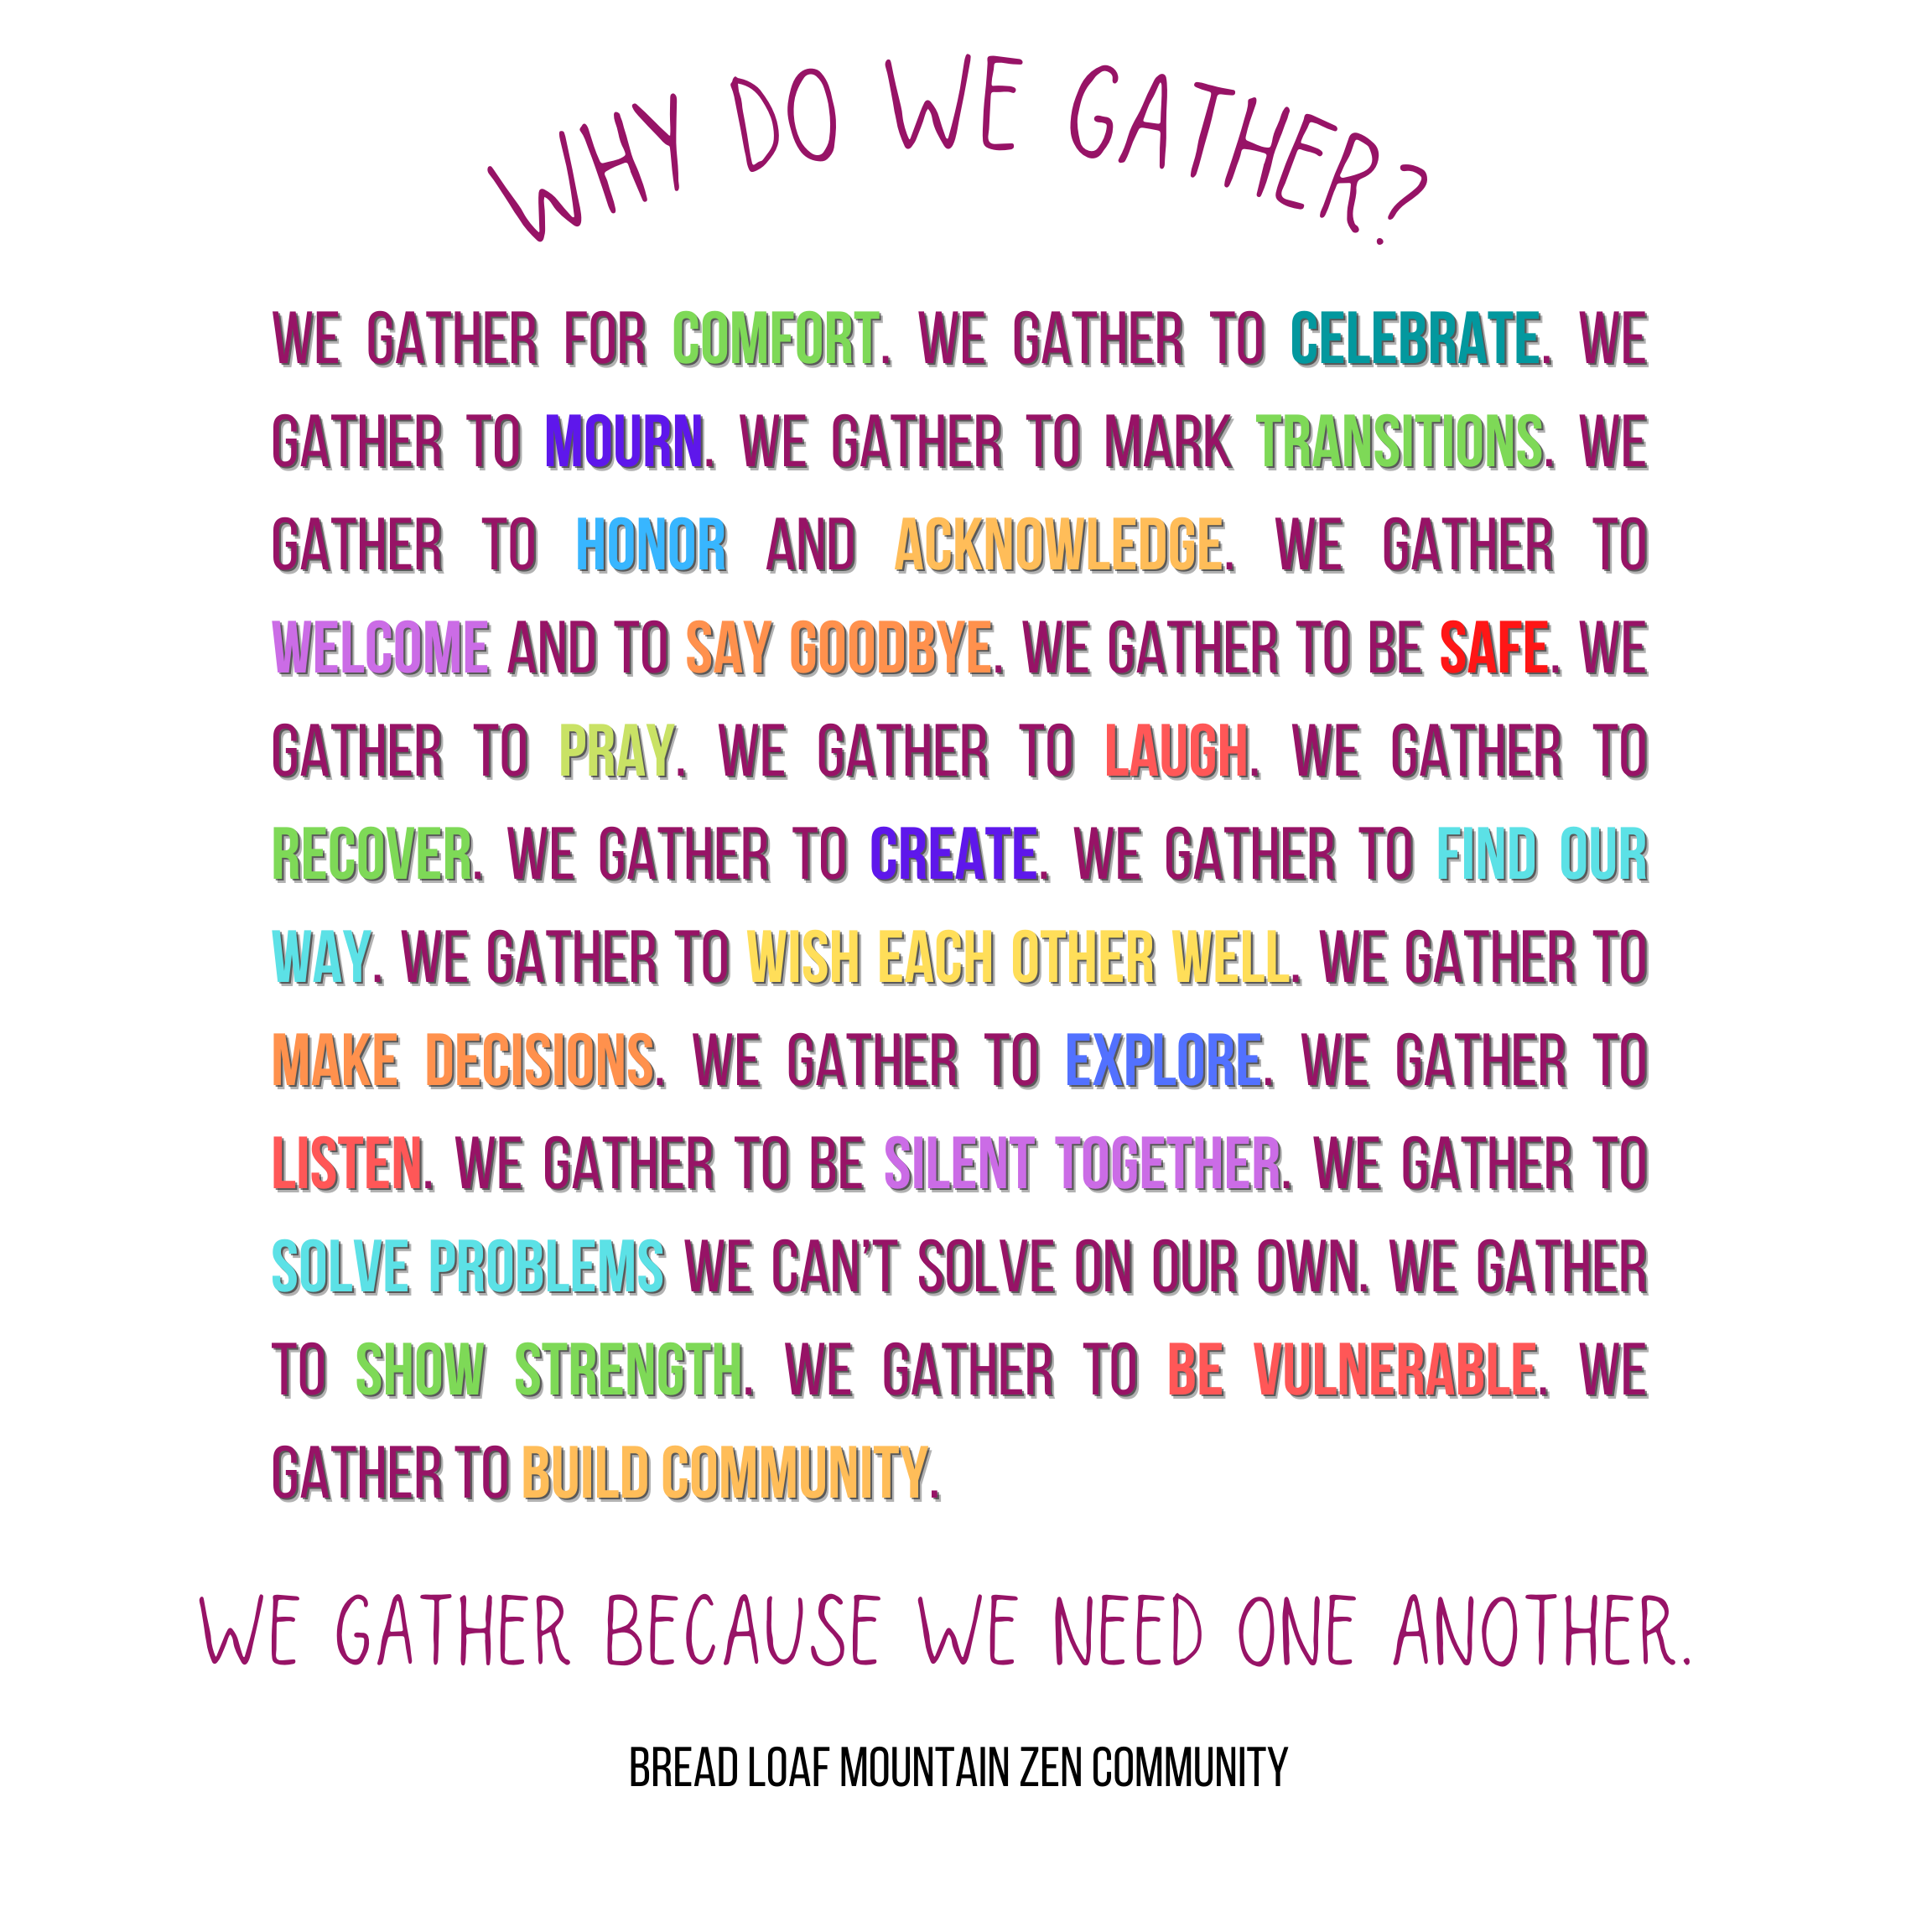 Who Do We Gather? We gather for comfort, to celebrate, to mourn, to mark transitions, ... to build community.